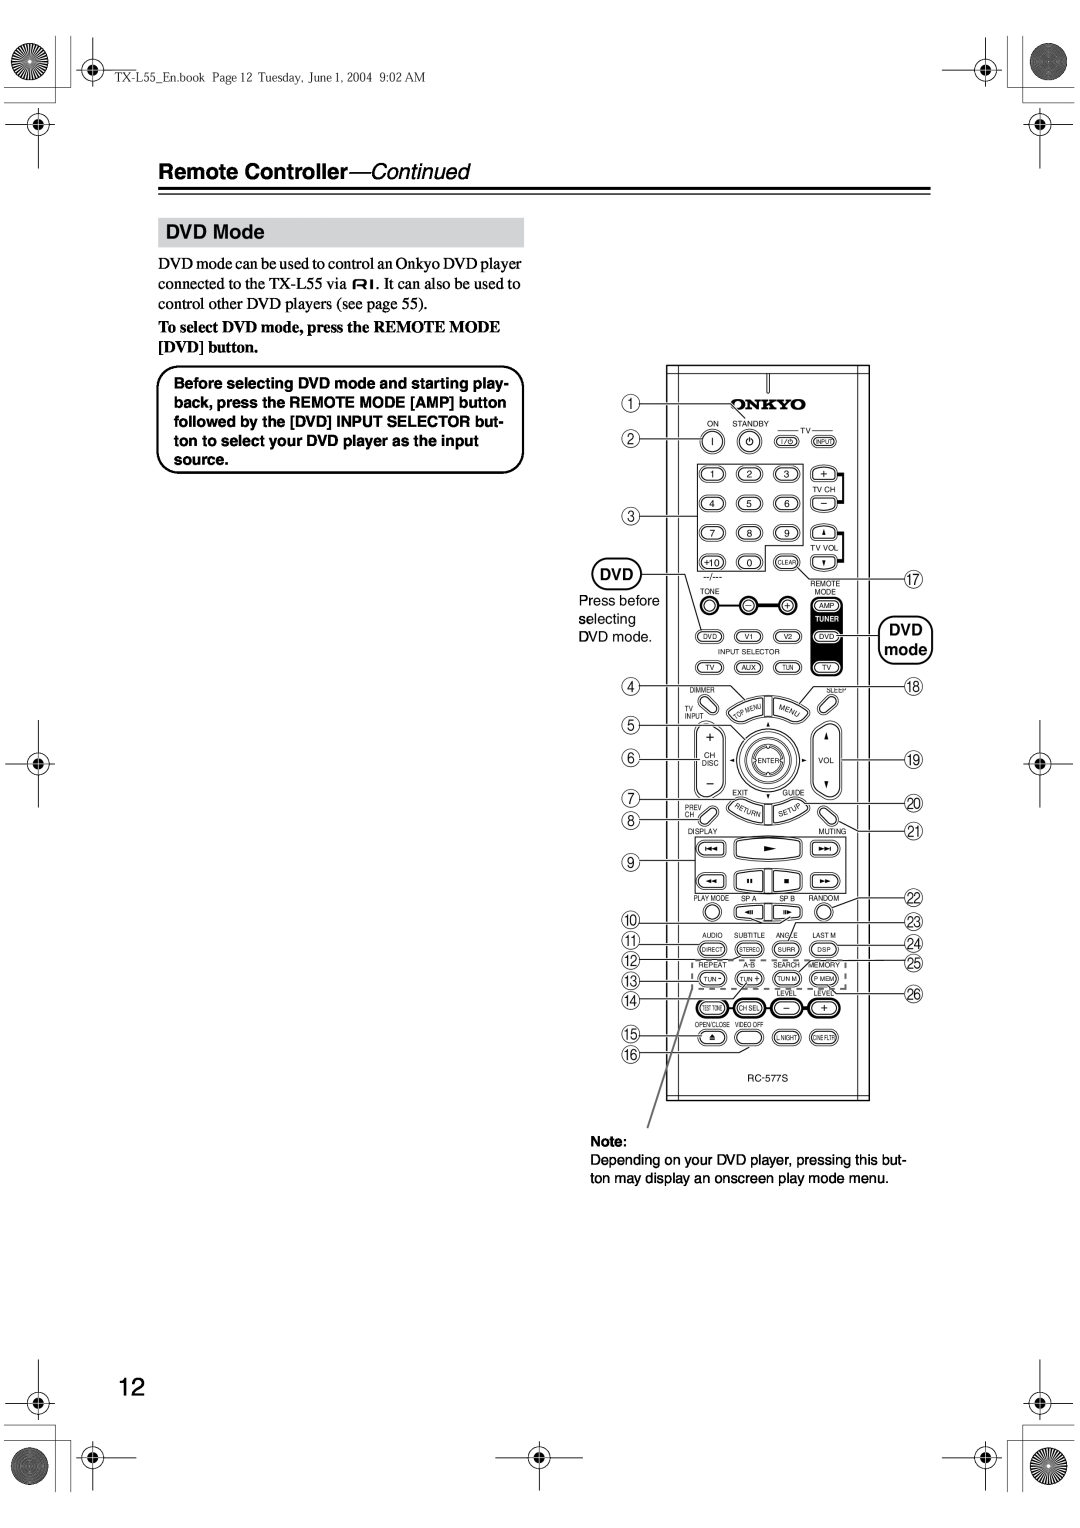 Onkyo TX-L55 instruction manual Remote Controller-Continued, DVD Mode 